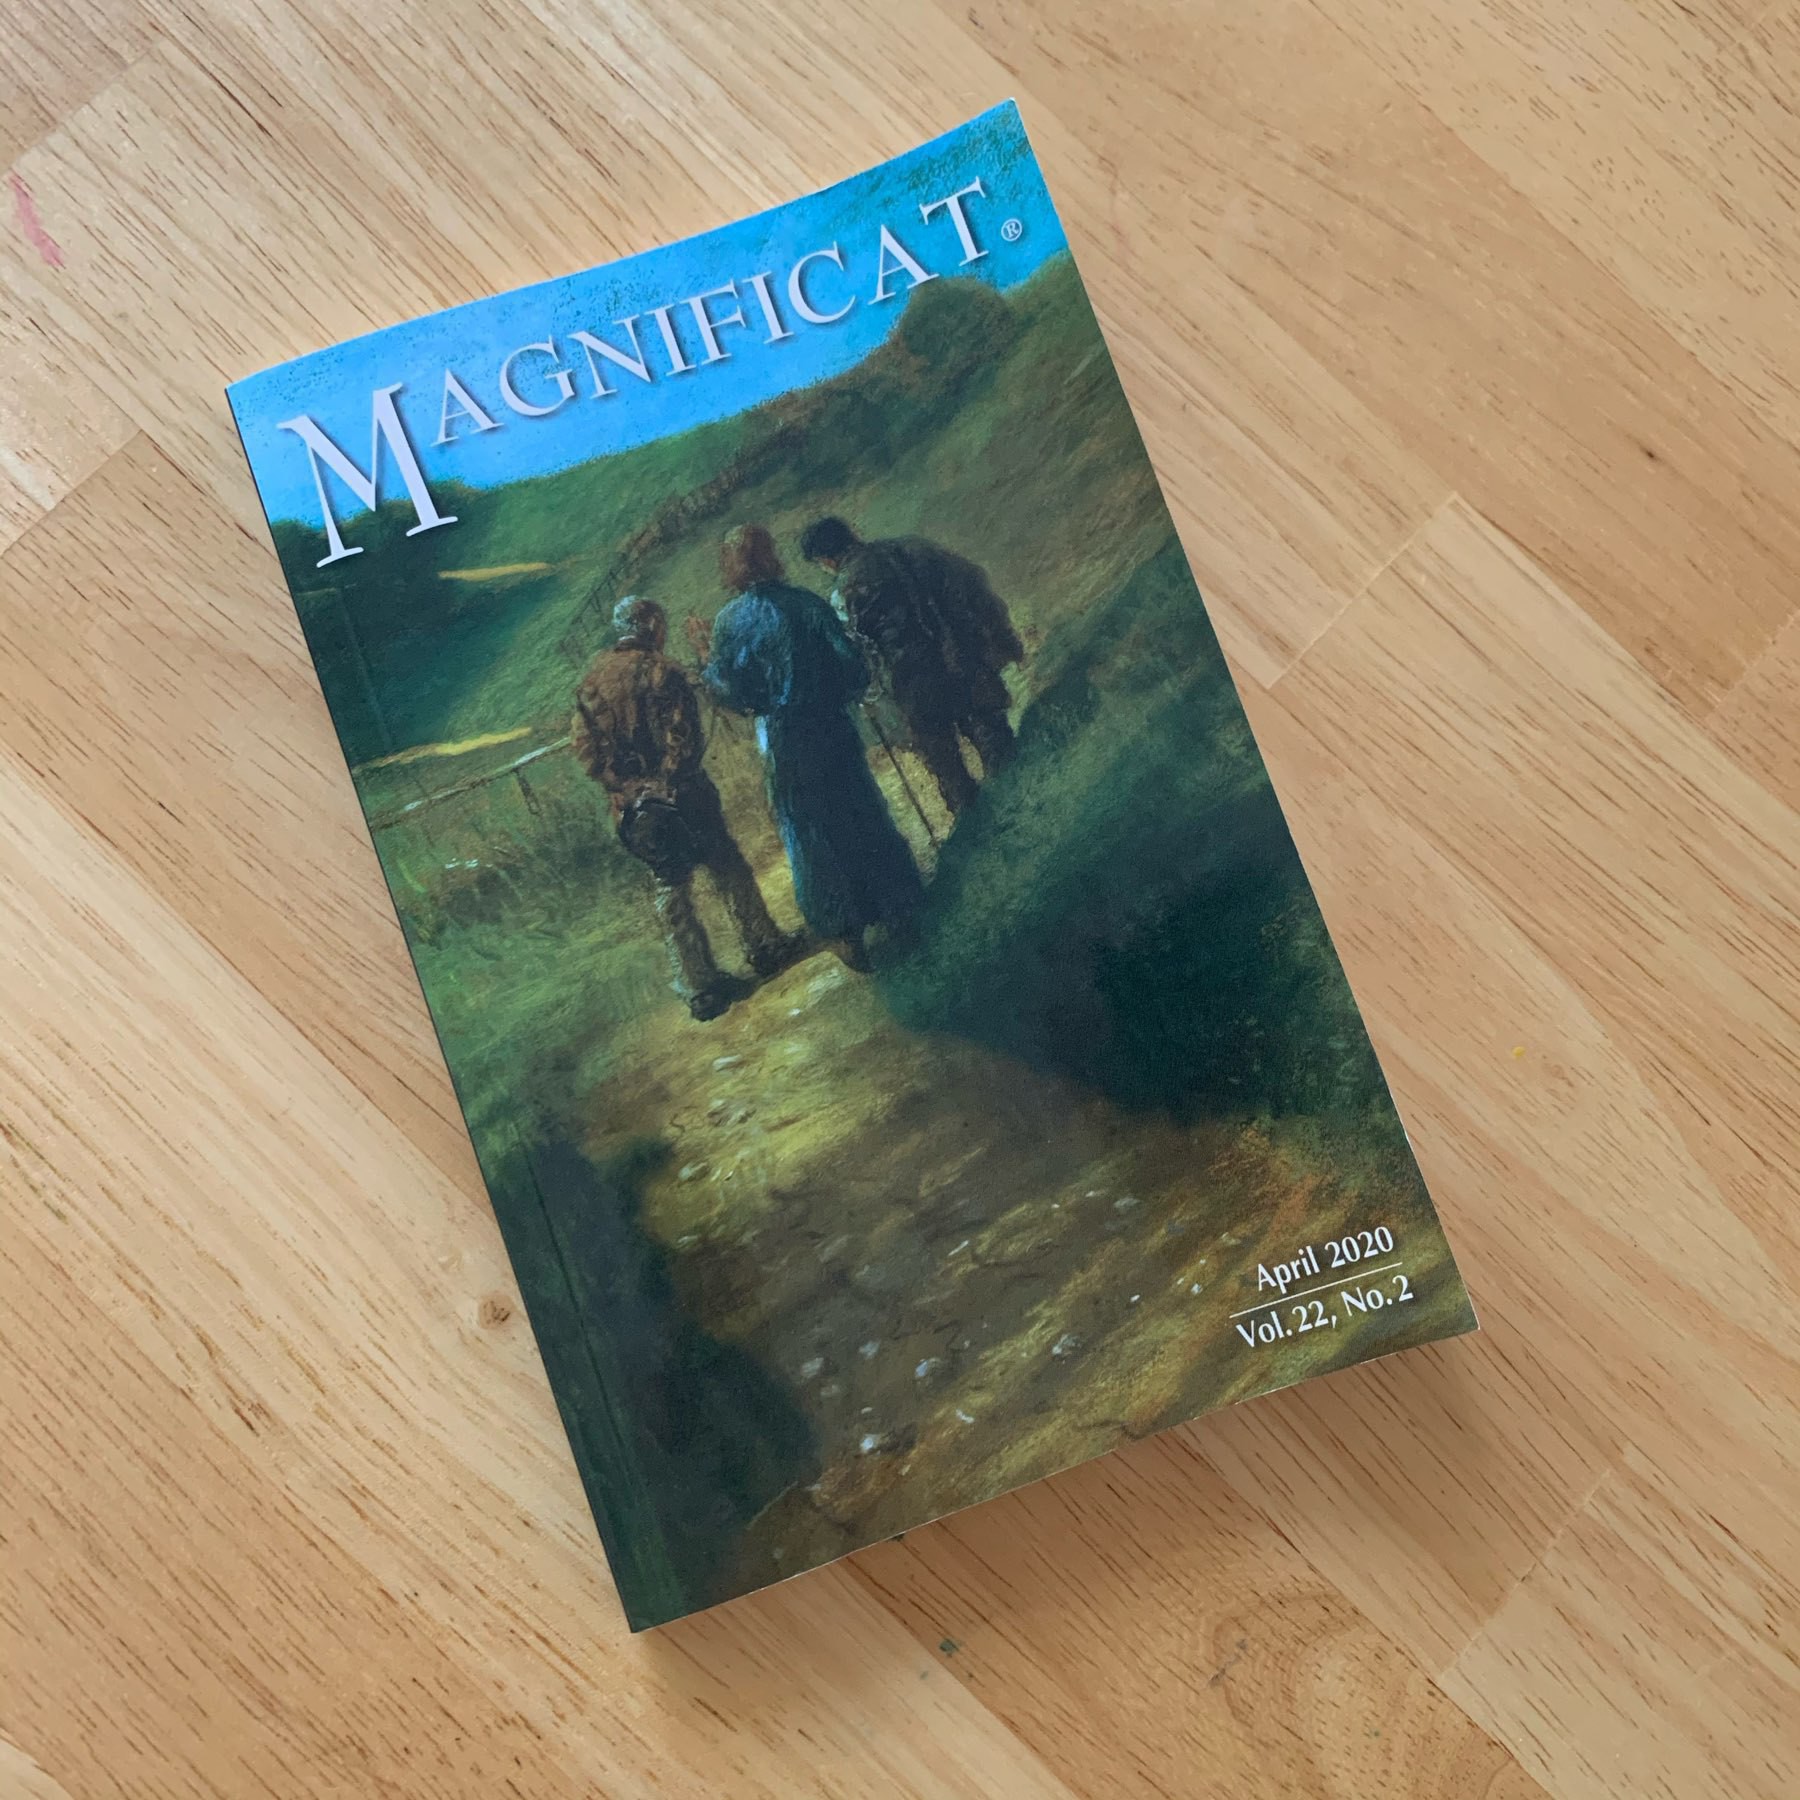 Cover art on April 2020 edition of Magnificat